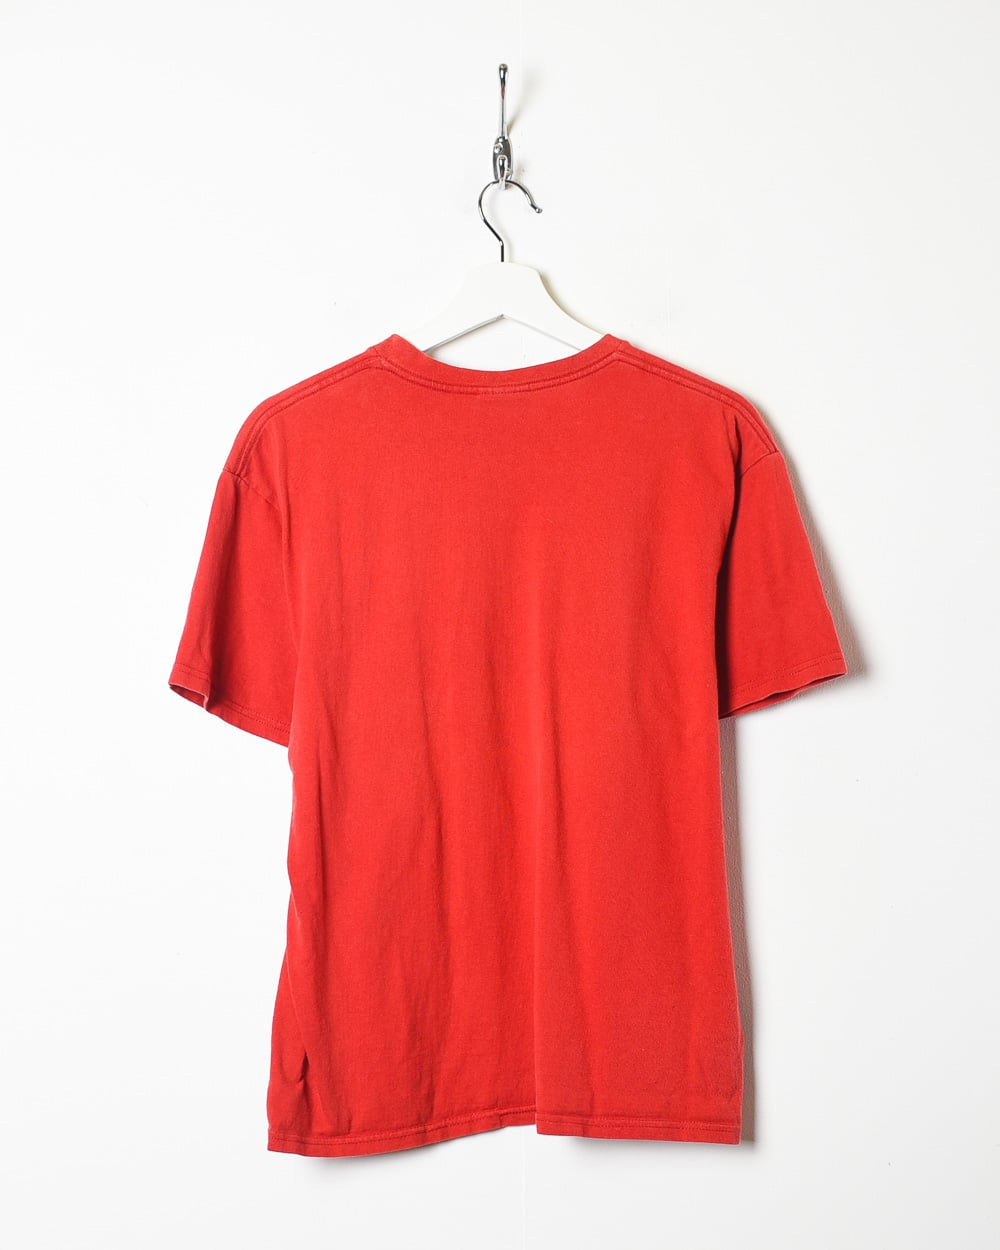 Red Nike T-Shirt - Small